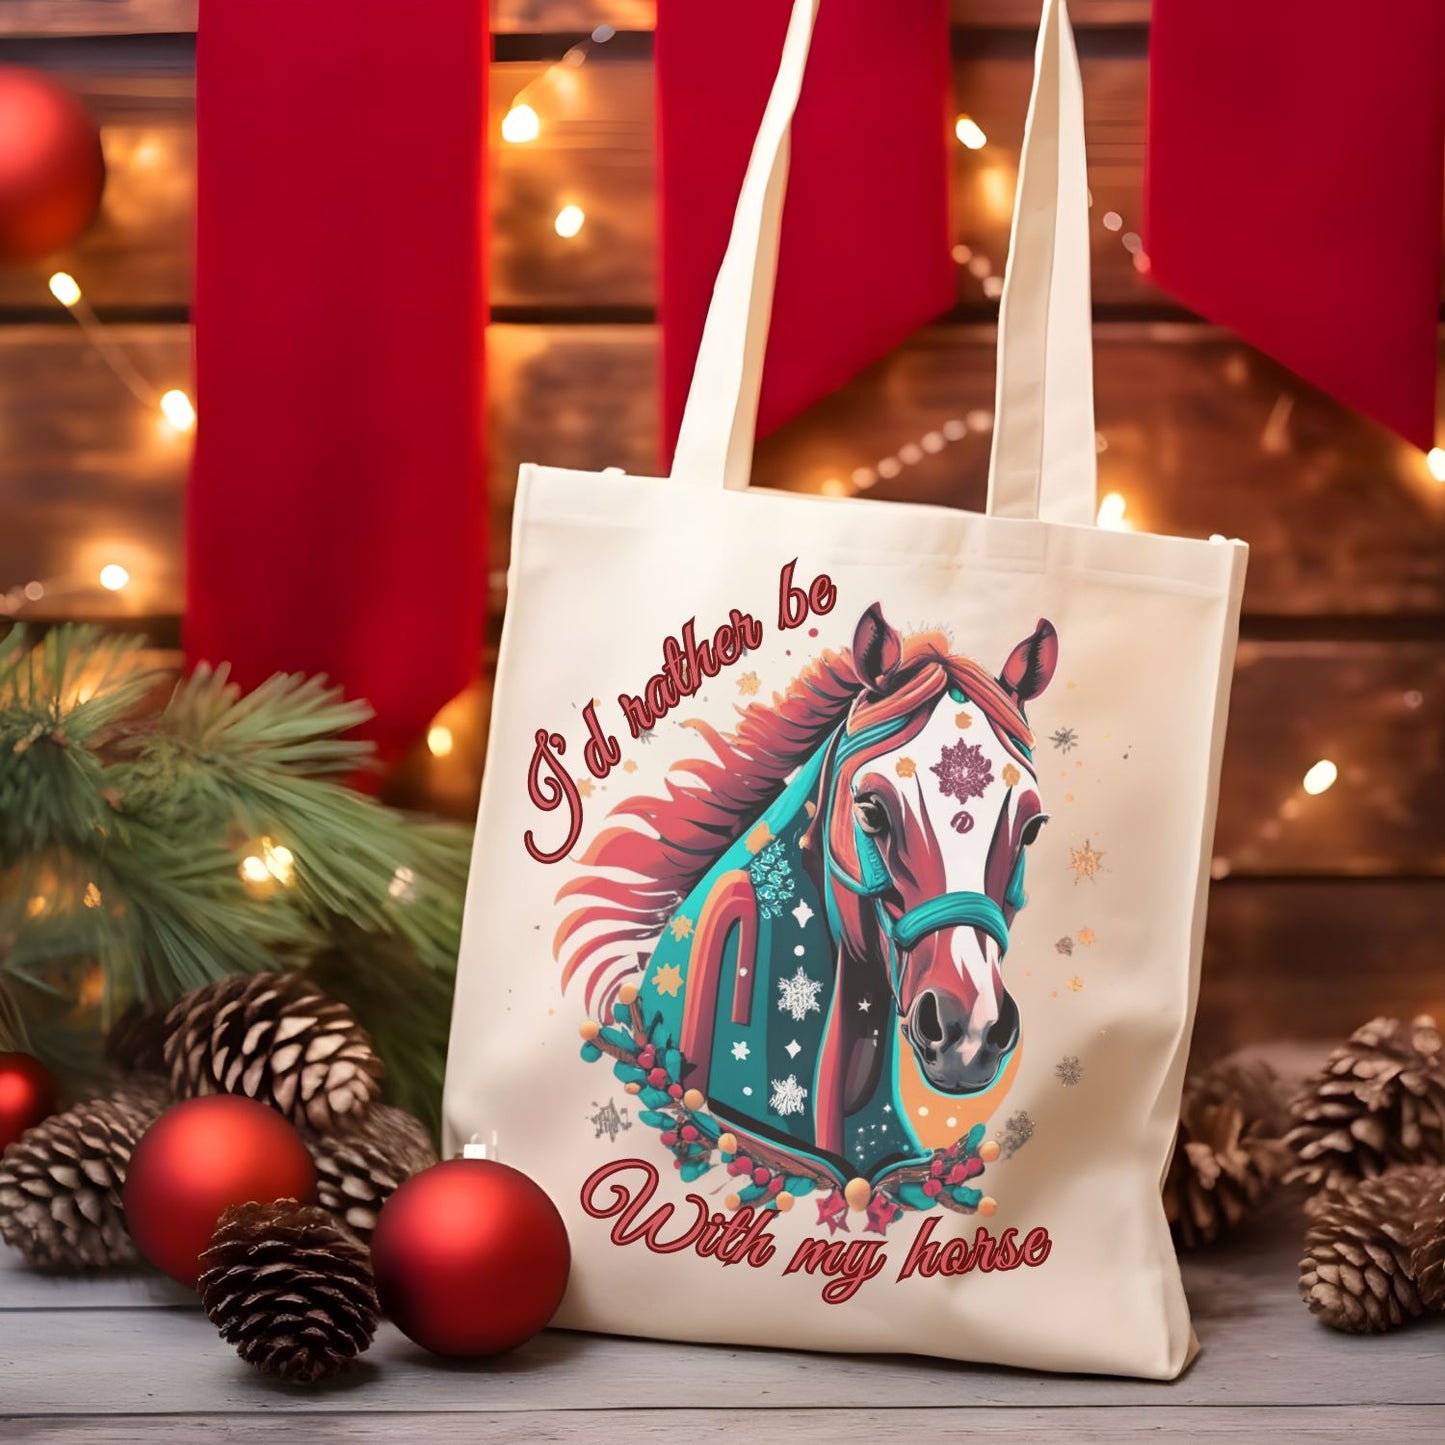 Horse Trainer Tote, Horse Lover Bag, Gift Tote Bag, Equestrian Gift, 'I'd Rather Be with My Horse' - Carry Your Passion with this Tote for Horse Enthusiasts Accessories   